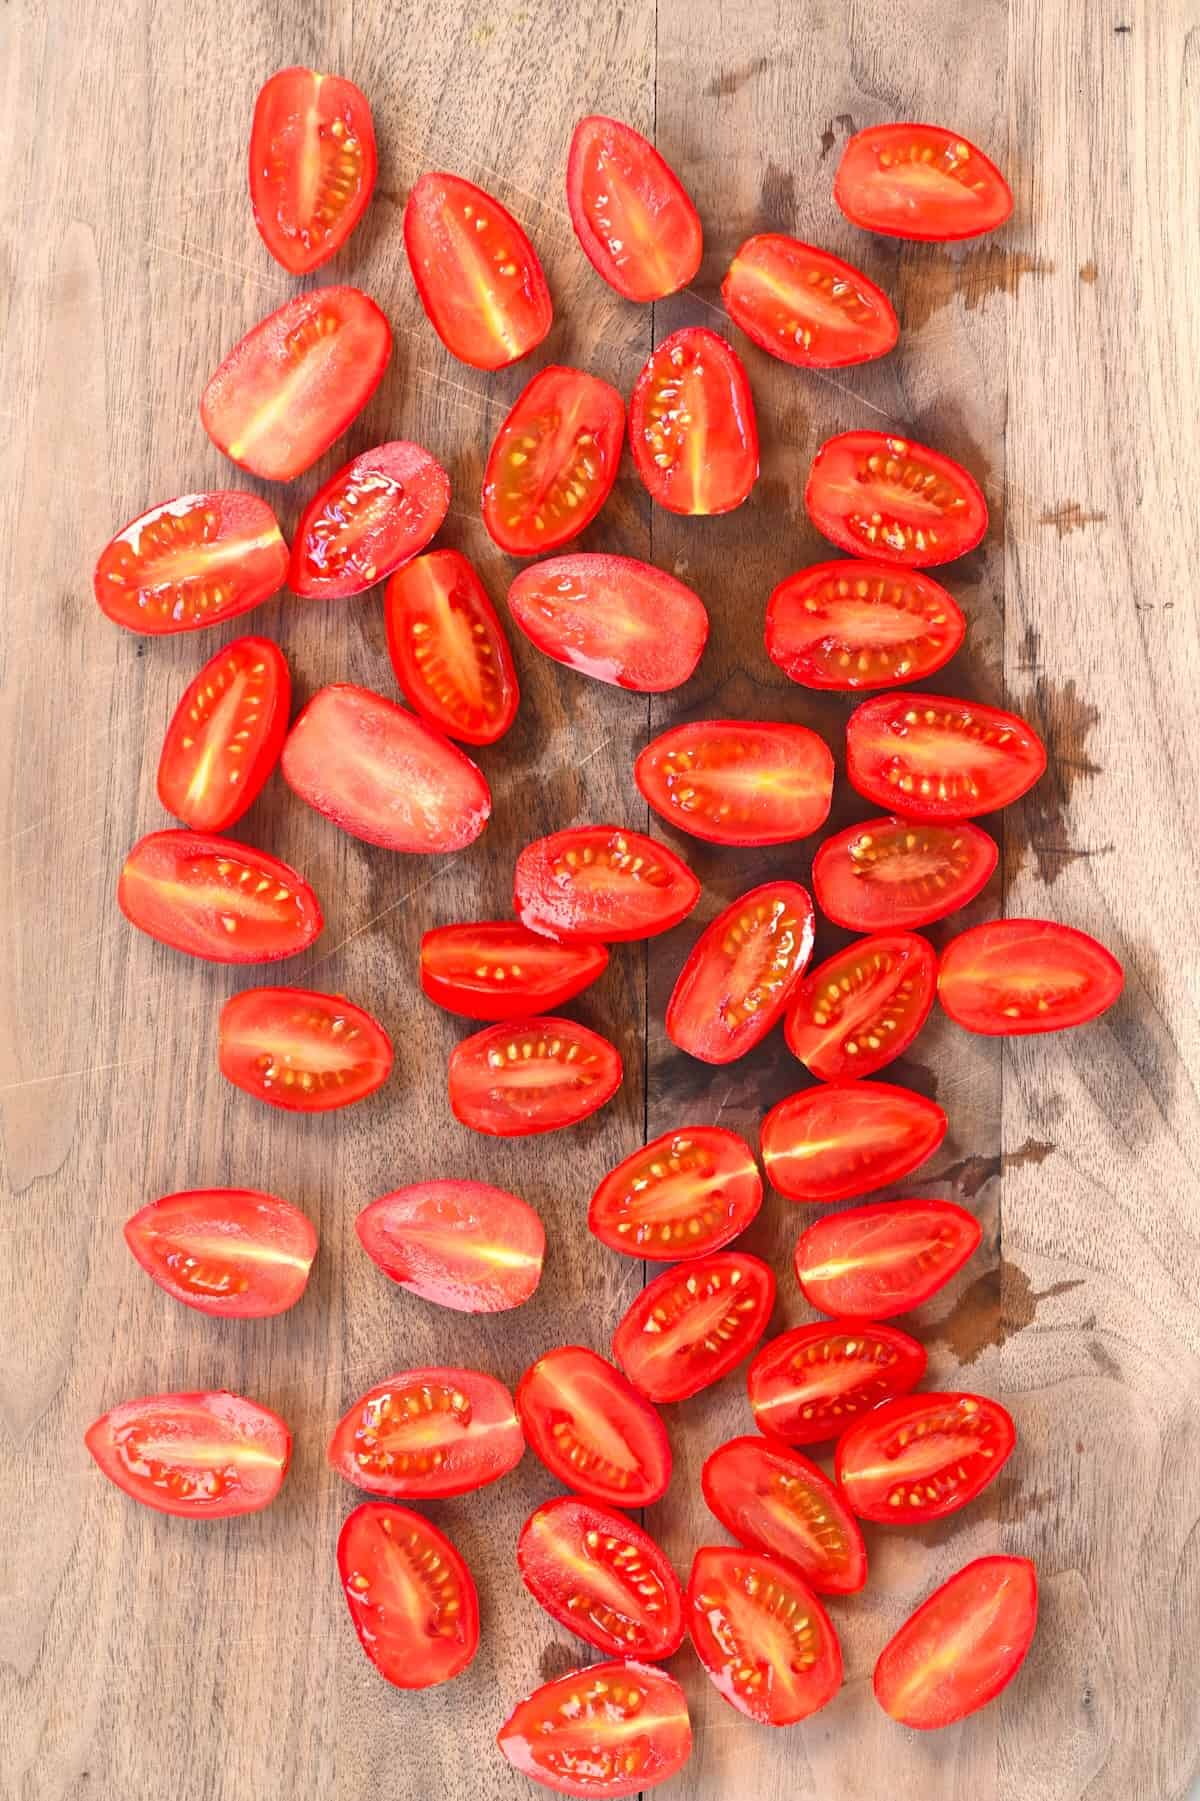 Cherry tomatoes sliced in two